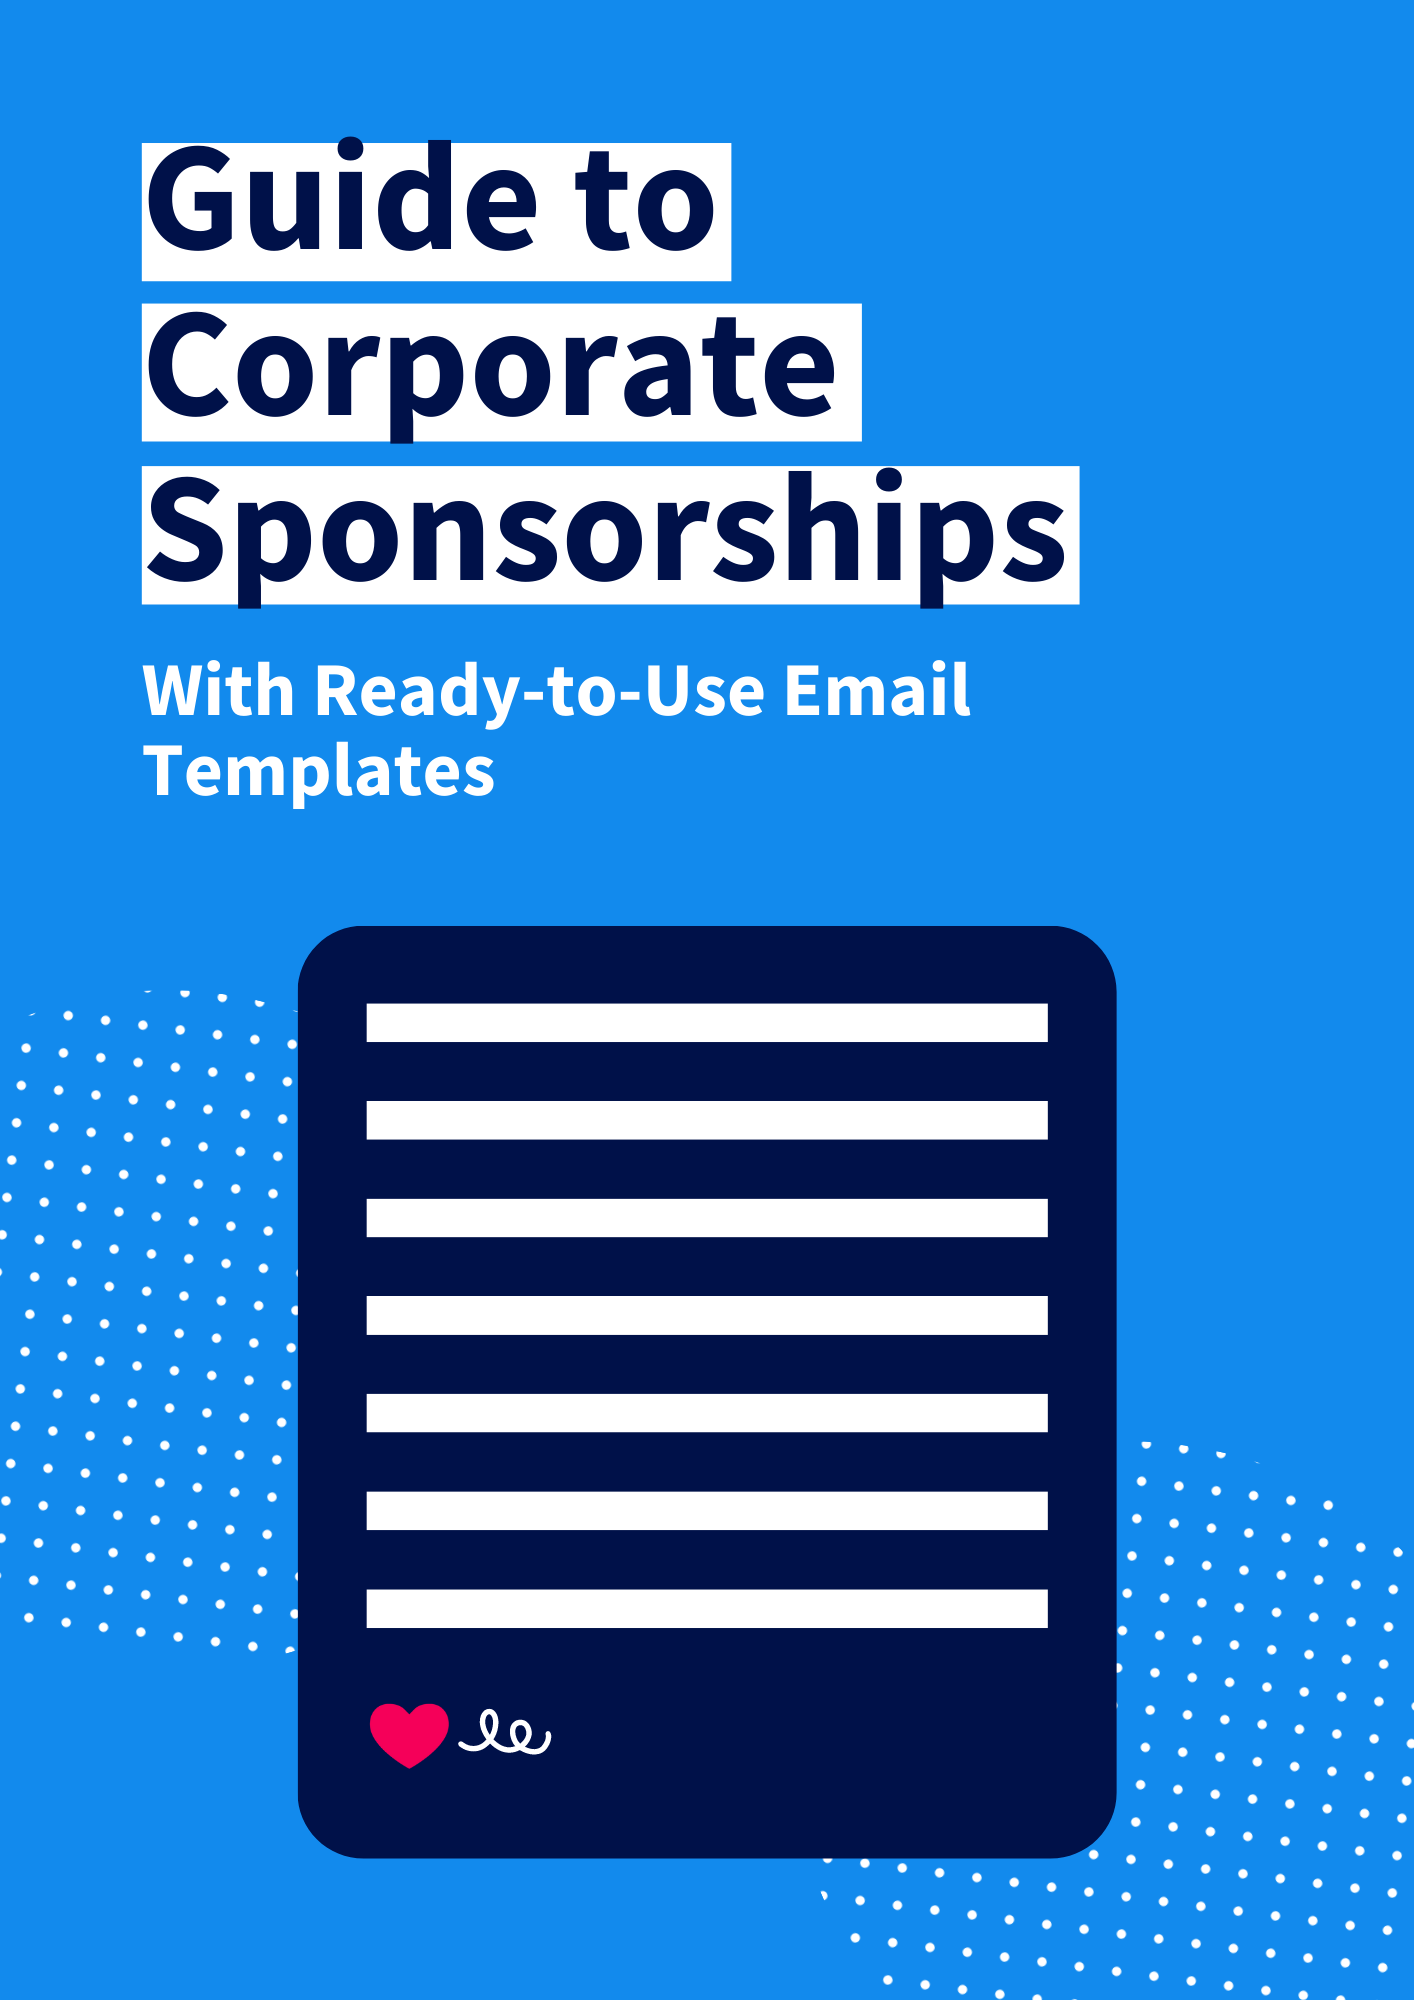 Guide to Corporate Sponsorships